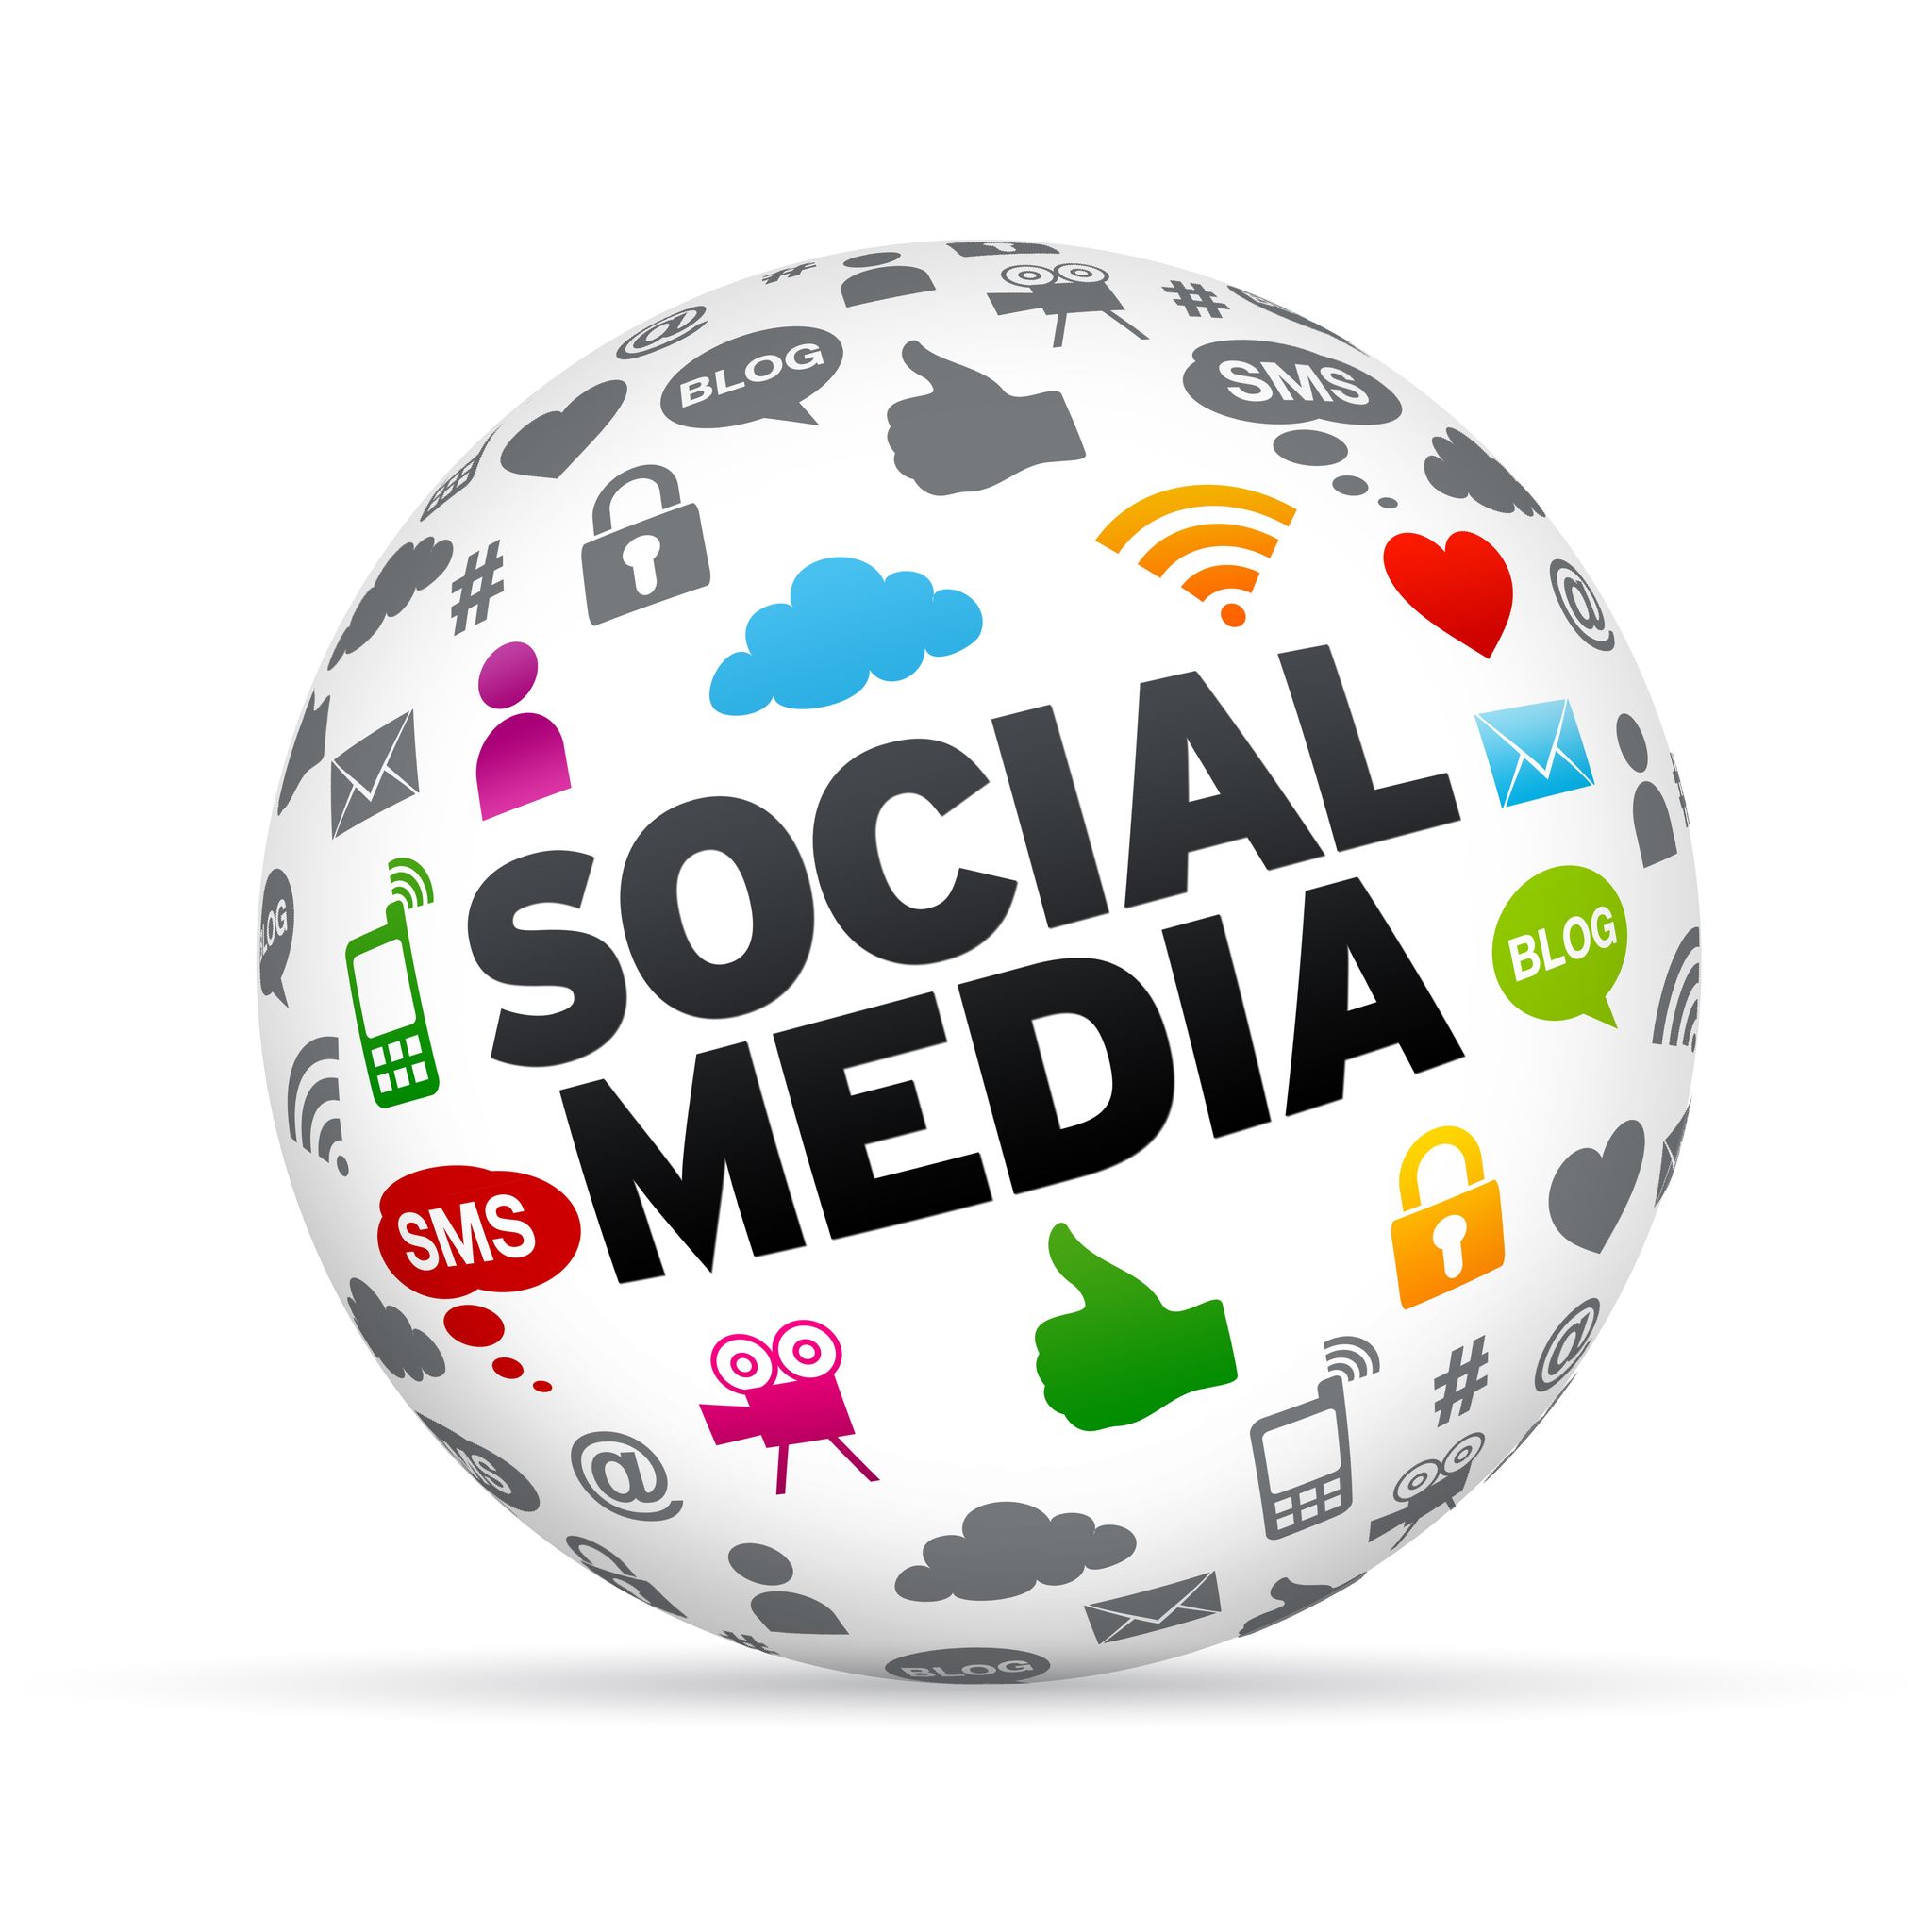 True North Social is the best social media marketing agency to implement your strategies